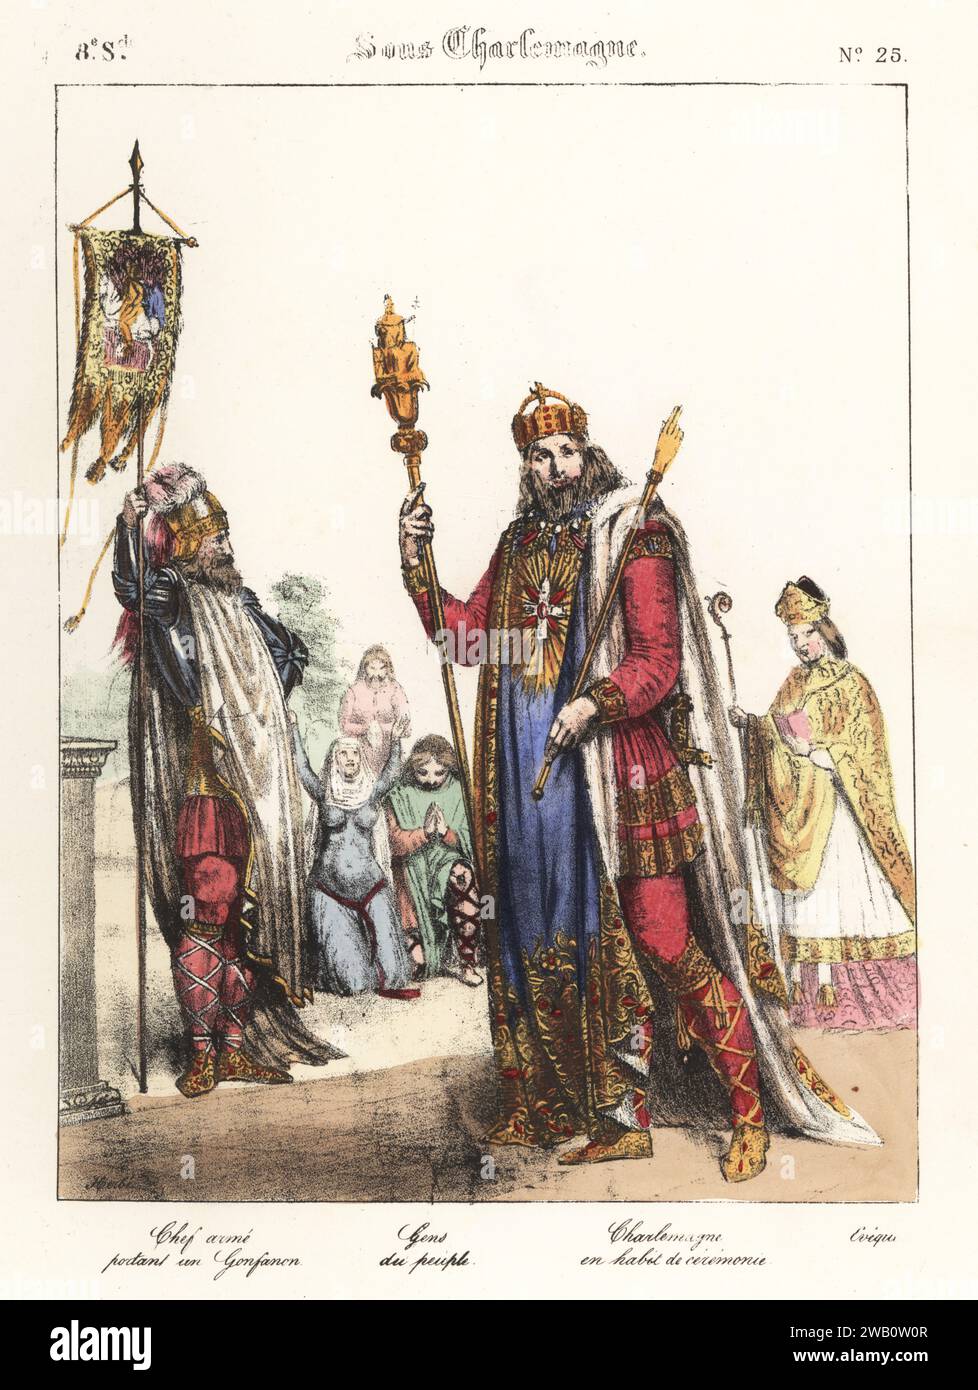 Emperor Charlemagne with Frankish chieftain holding a gonfalon or banner, 8th century. Charlemagne in ceremonial robes, crown, cape of Saint Maurice, embroidered silk tunic, with sceptres. Officer in plumed helmet, breastplate, tunic, and mantle. Chef arme portans un Gonfanon, Gens du peuple, Charlemagne en habit de ceremonie, Eveque. Sous Charlemagne, 8e Siecle. Handcoloured lithograph by Godard after an illustration by Charles Auguste Herbé from his own Costumes Francais, Civils, Militaires et Religieux, French Costumes, Civil, Military and Religious, Maison Martinet, Paris, 1837. Stock Photo